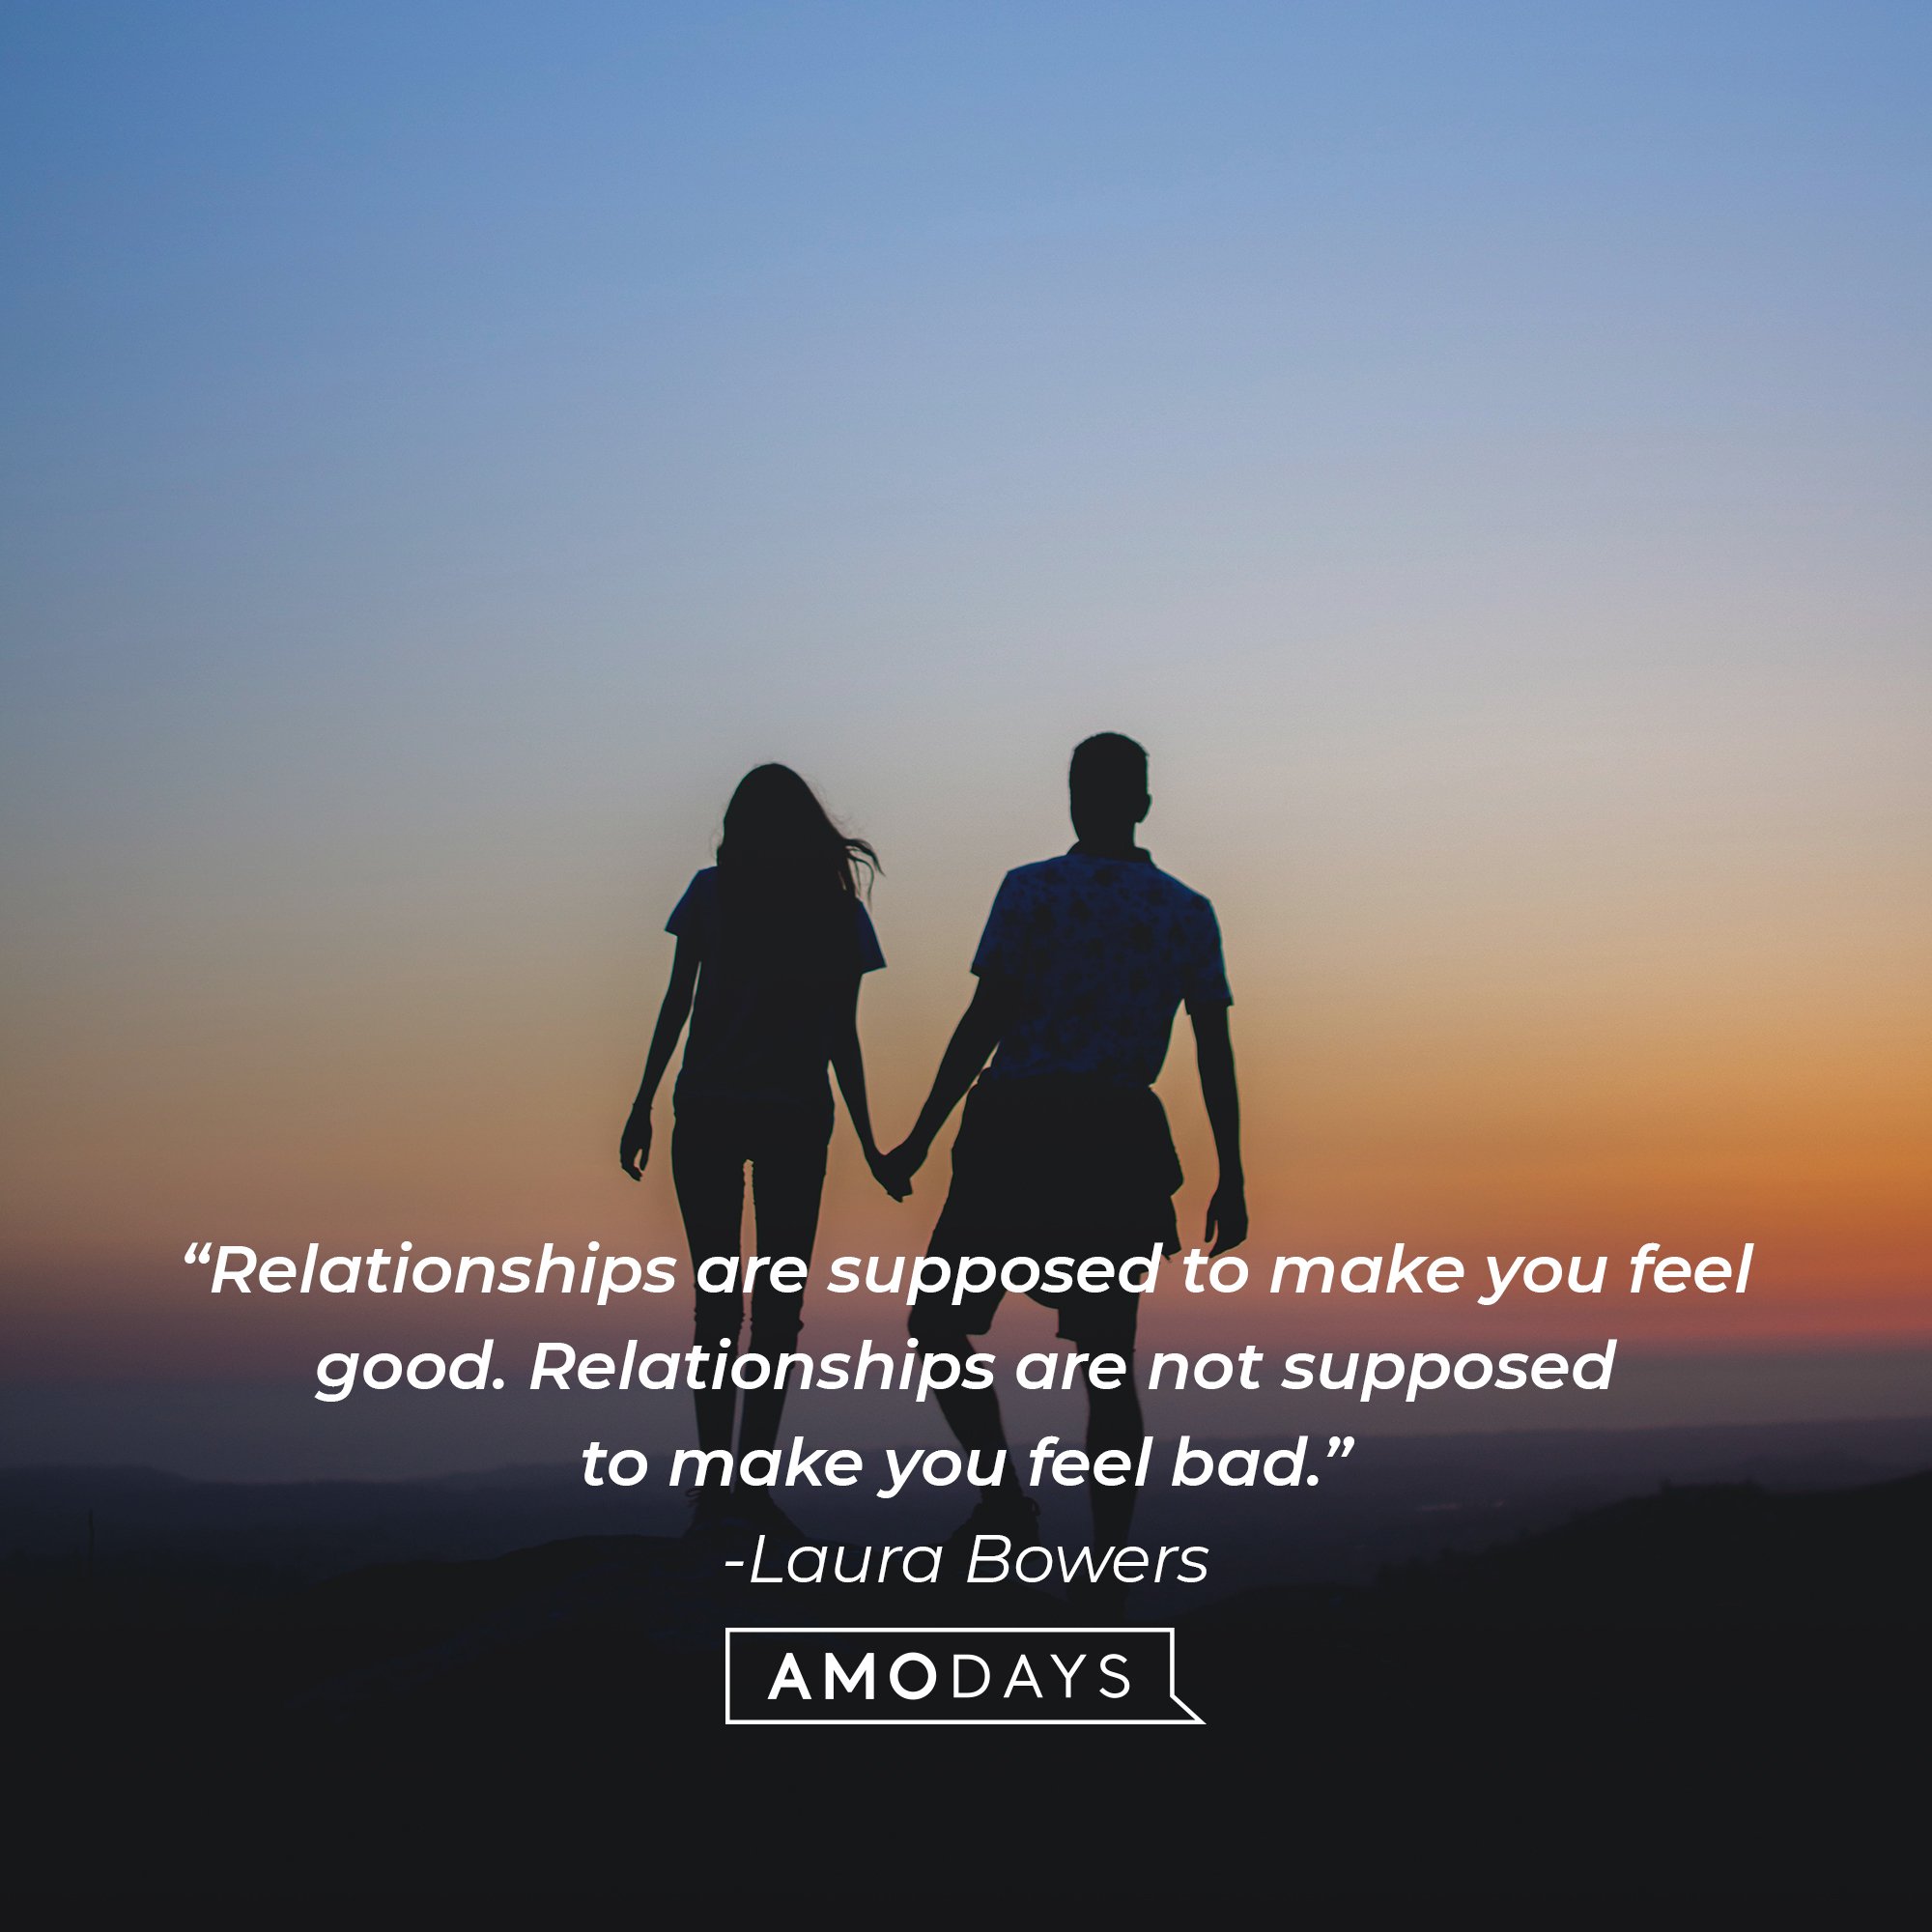 Laura Bowers's quote: “Relationships are supposed to make you feel good. Relationships are not supposed to make you feel bad.” | Image: AmoDays